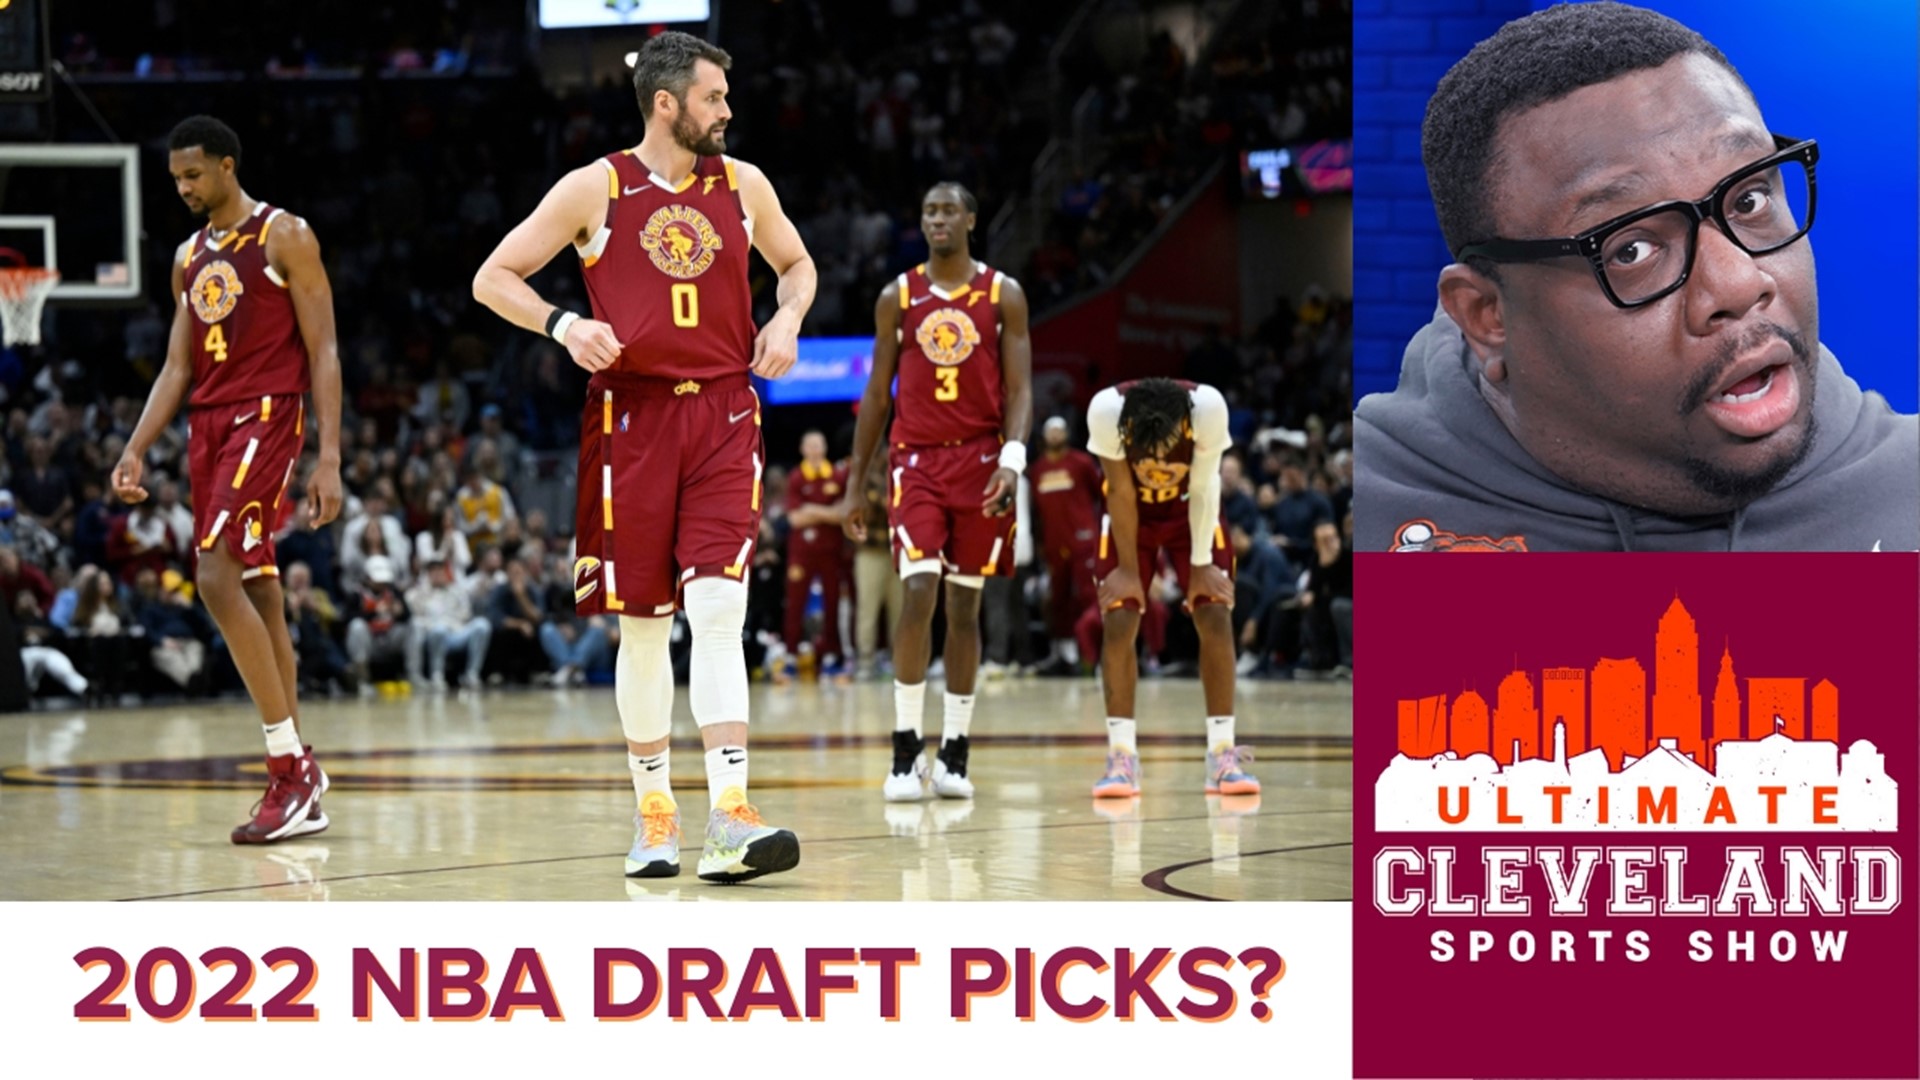 Who did the Cleveland Cavaliers draft in the 2022 NBA Draft